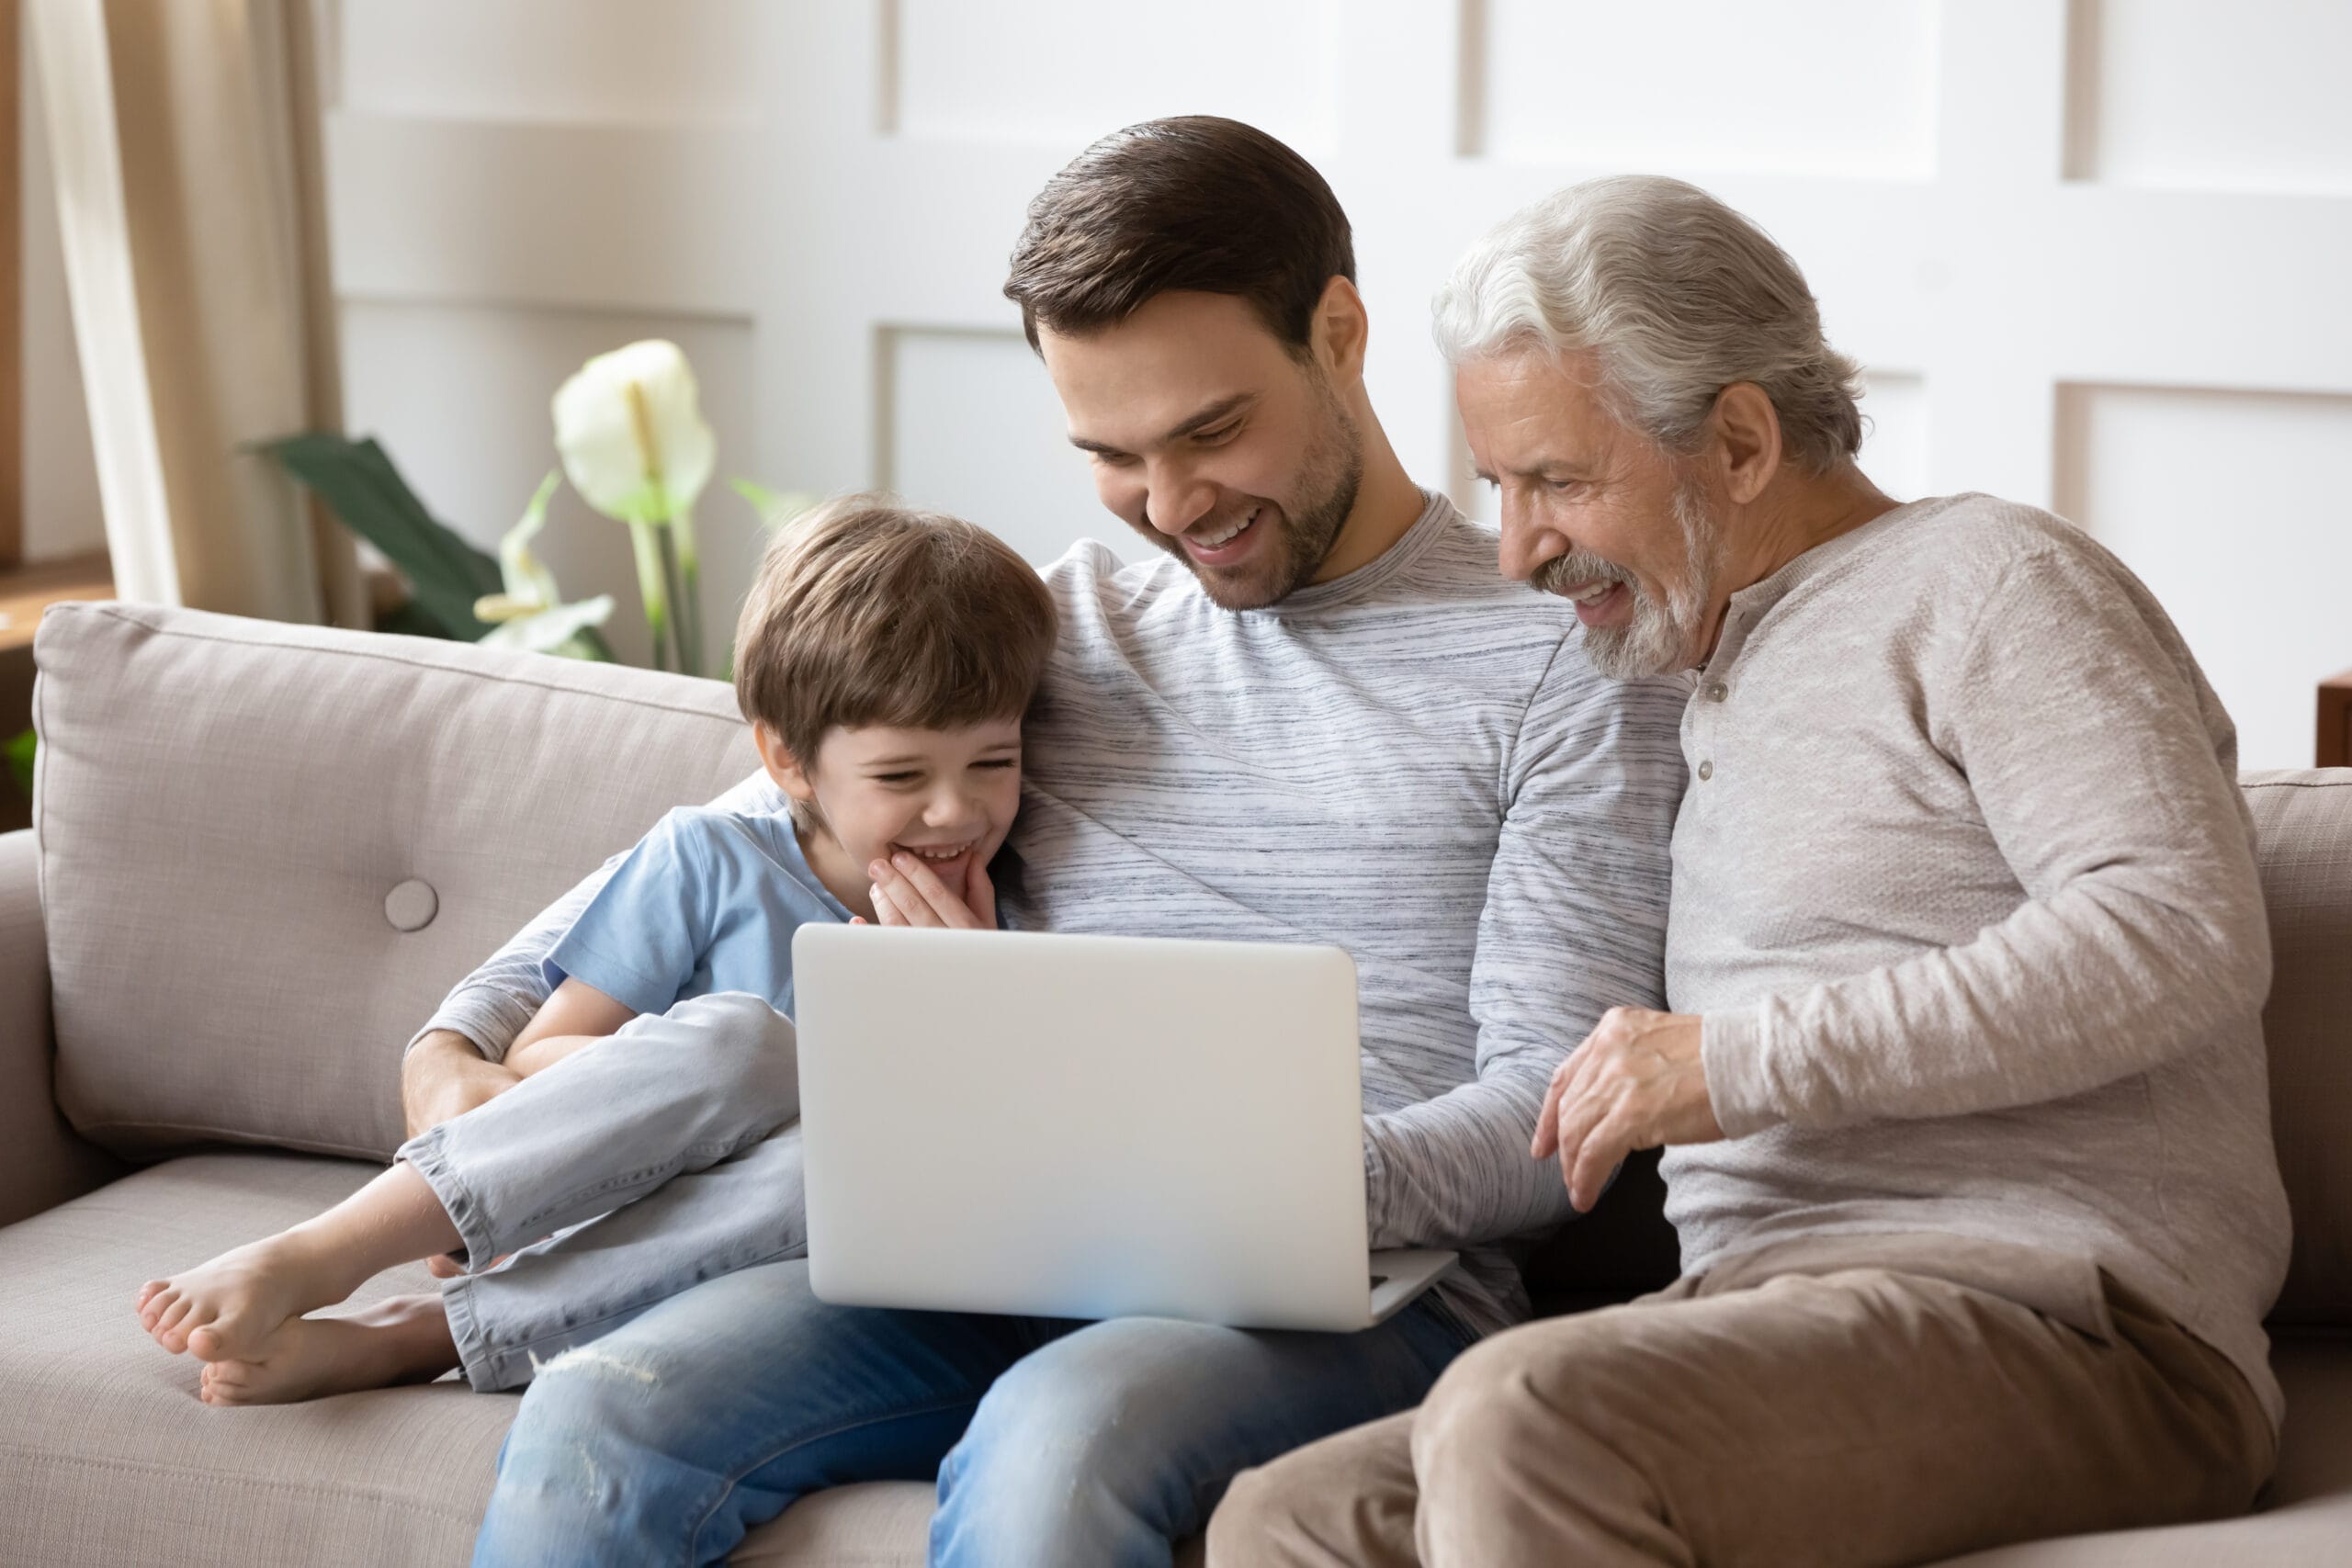 How Inheritance Tax Advisors Can Help to Protect Your Family’s Wealth